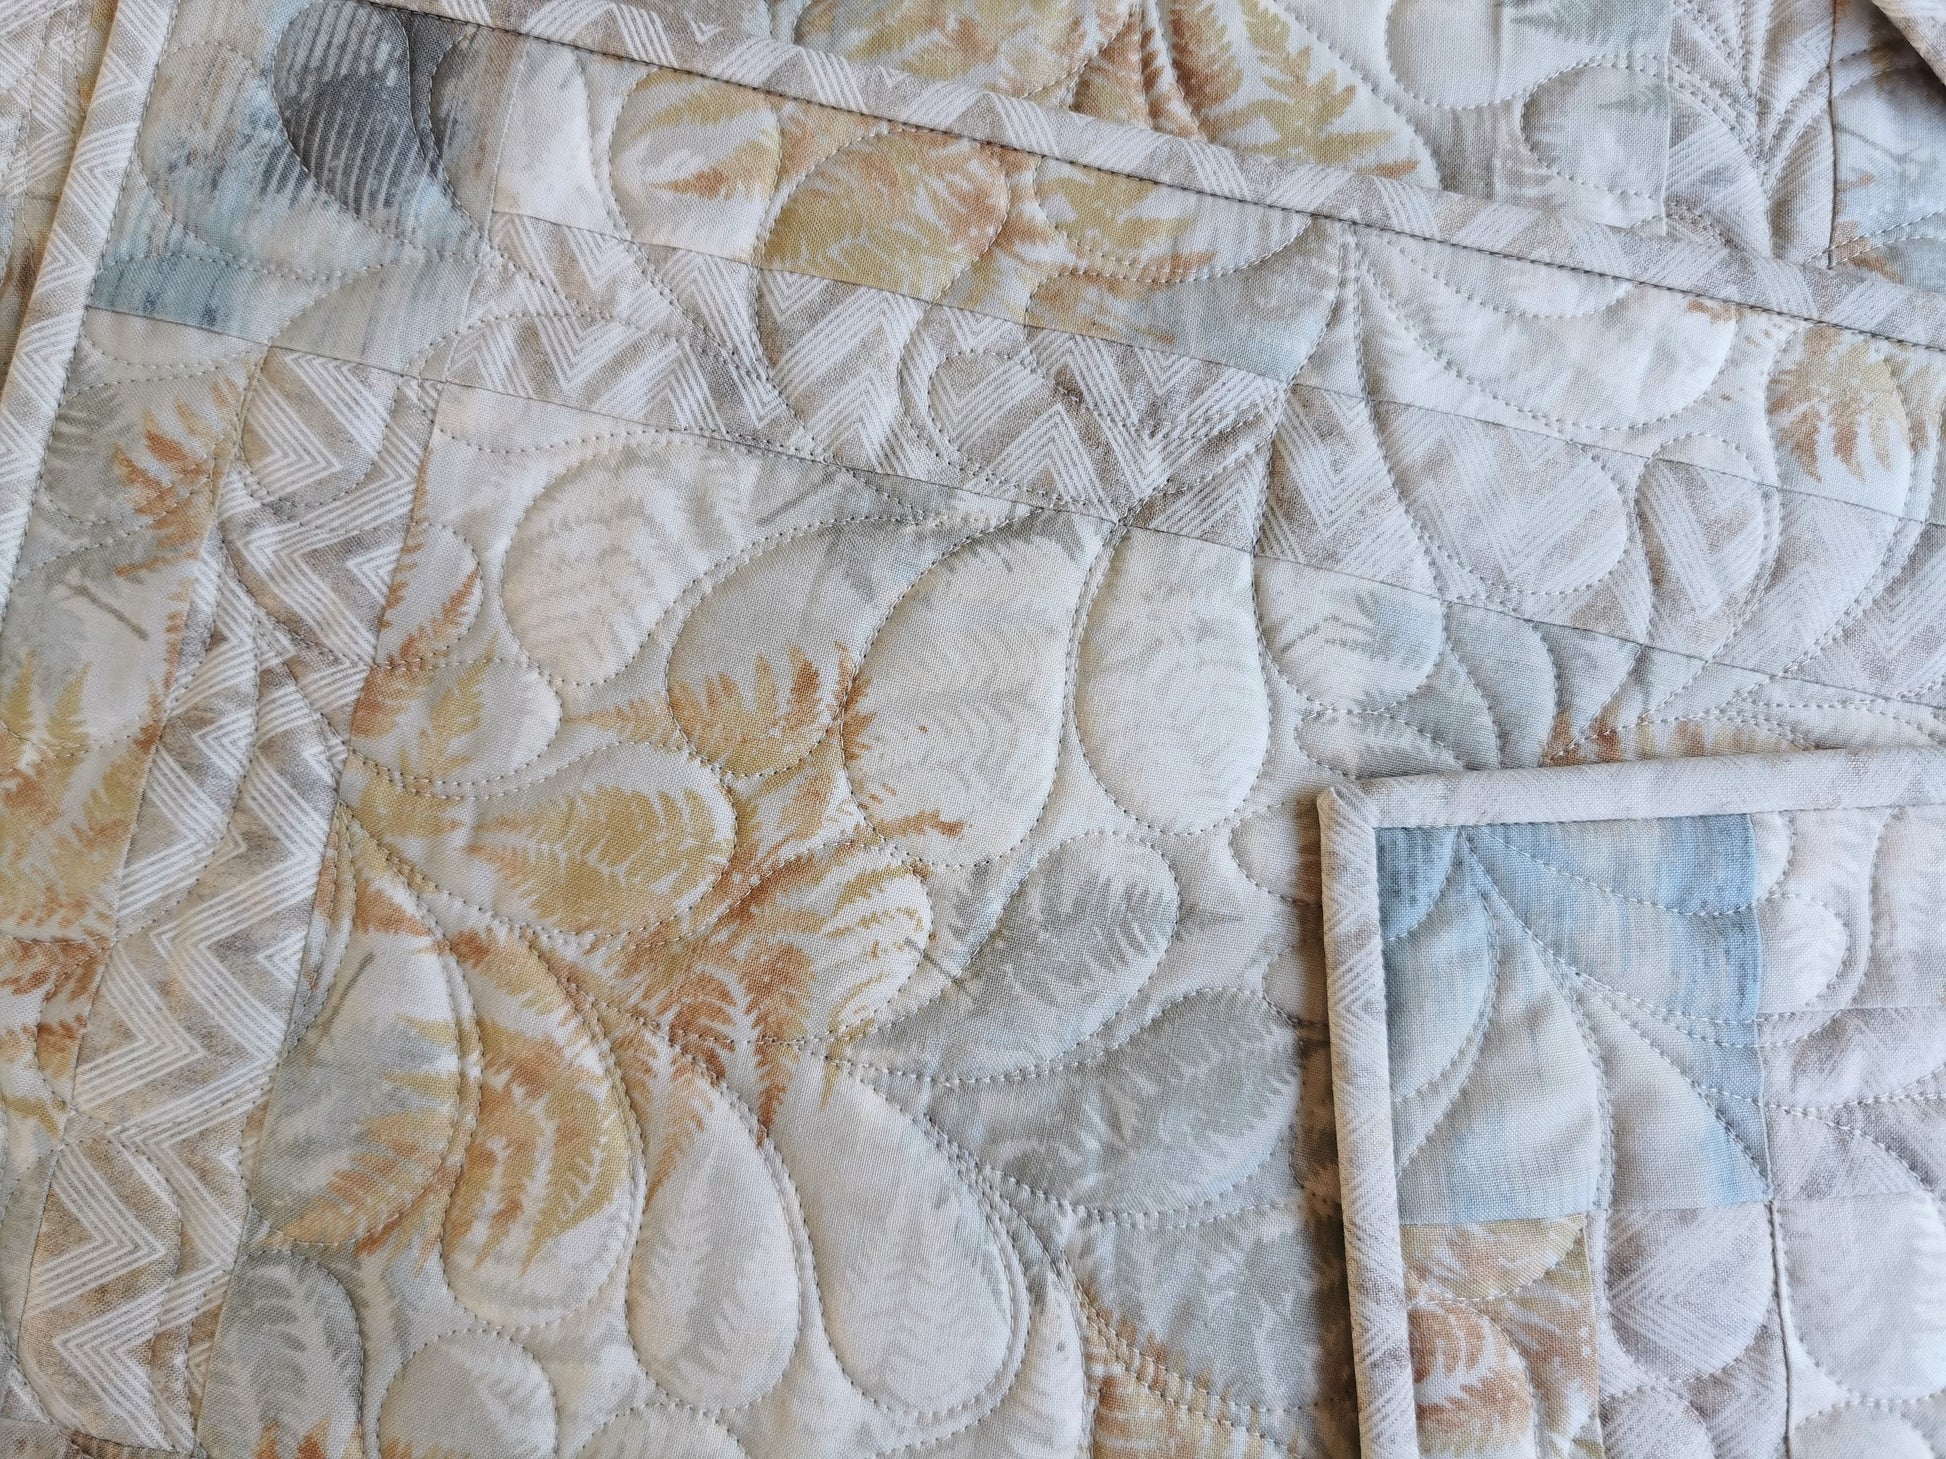 close up of the quilted placemats showing the abstract ferns in beige and slate blue.